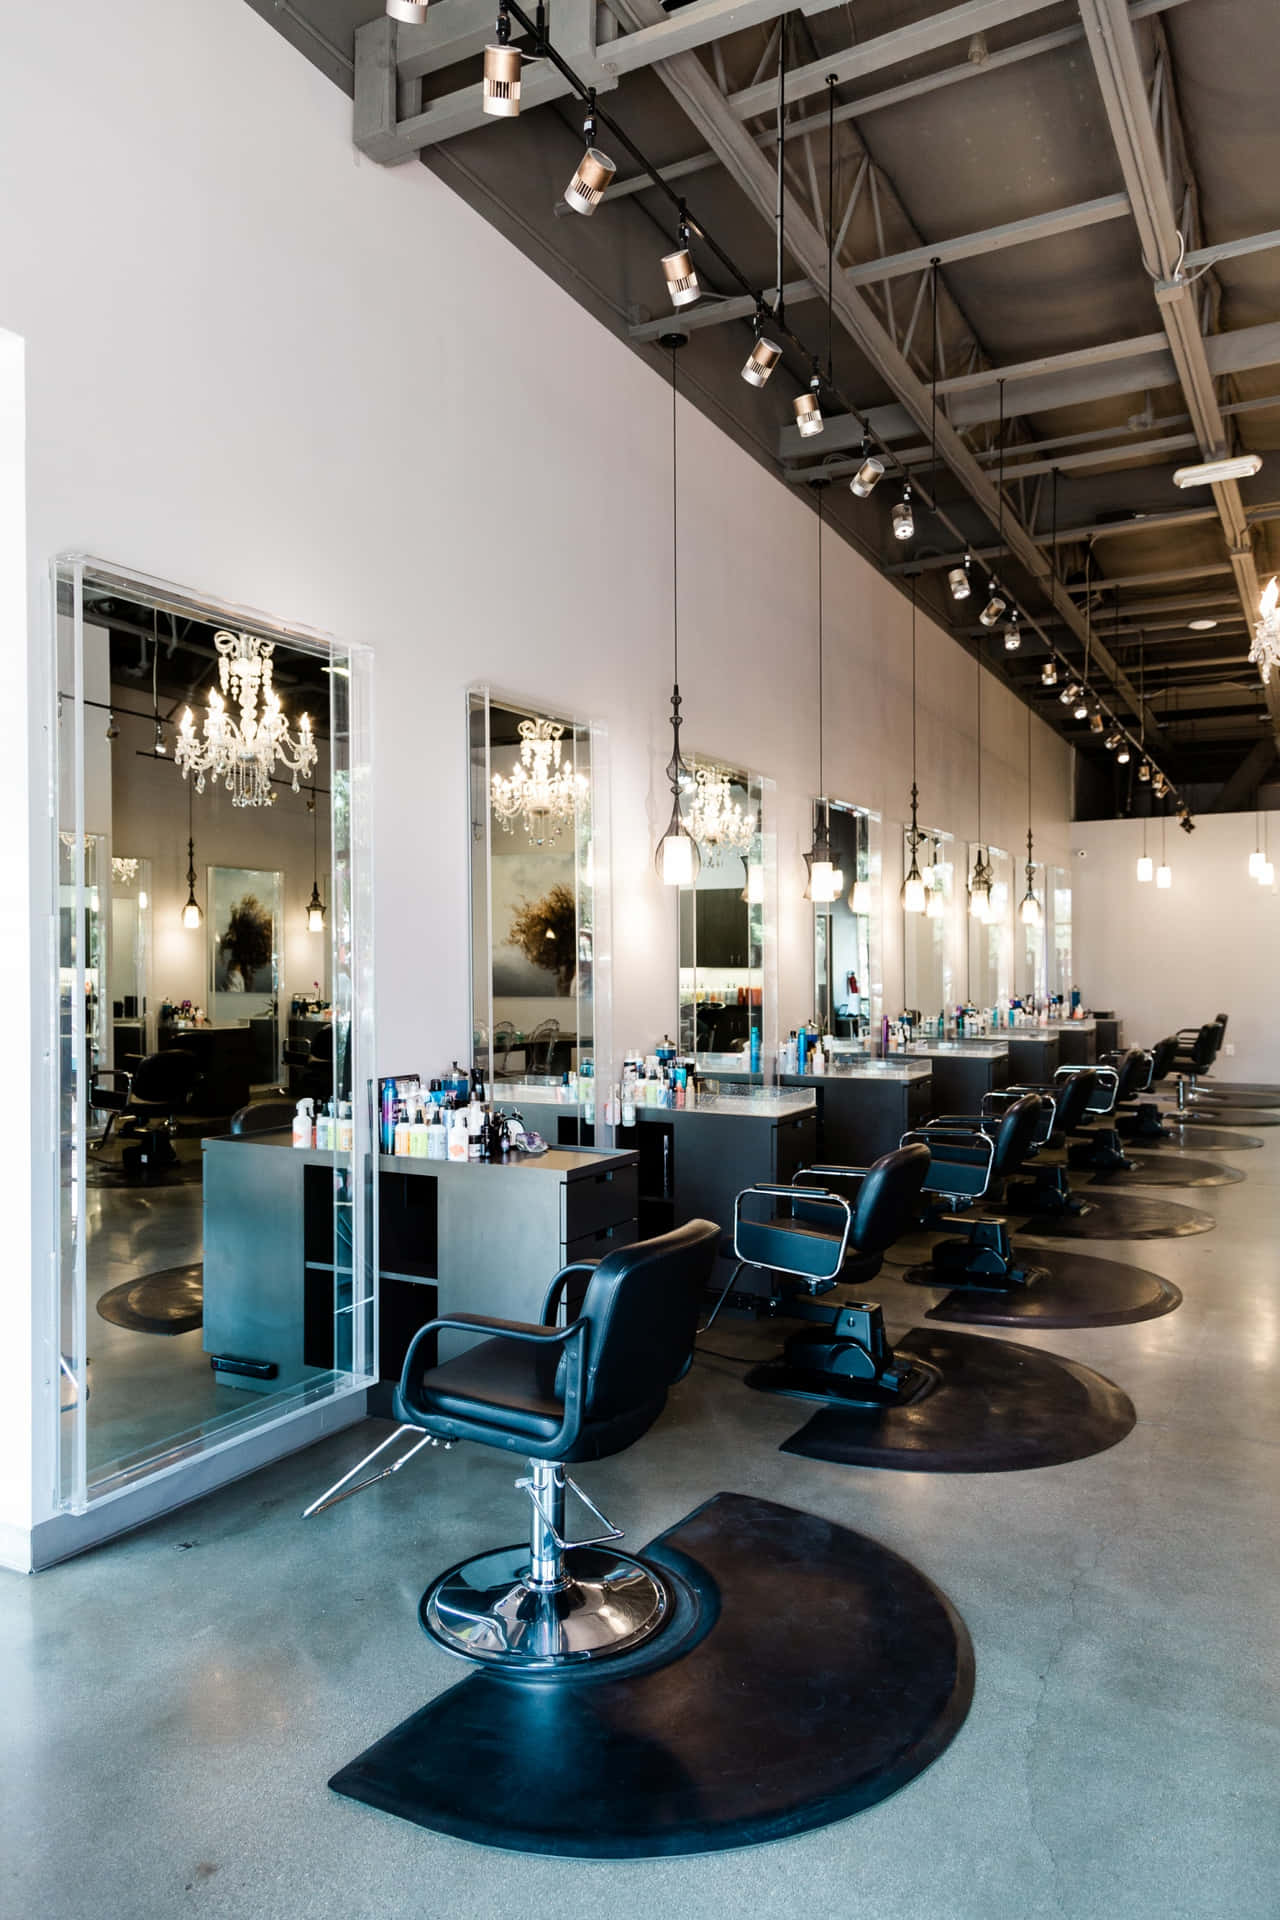 Pamper yourself with our incredible Hair Salon!